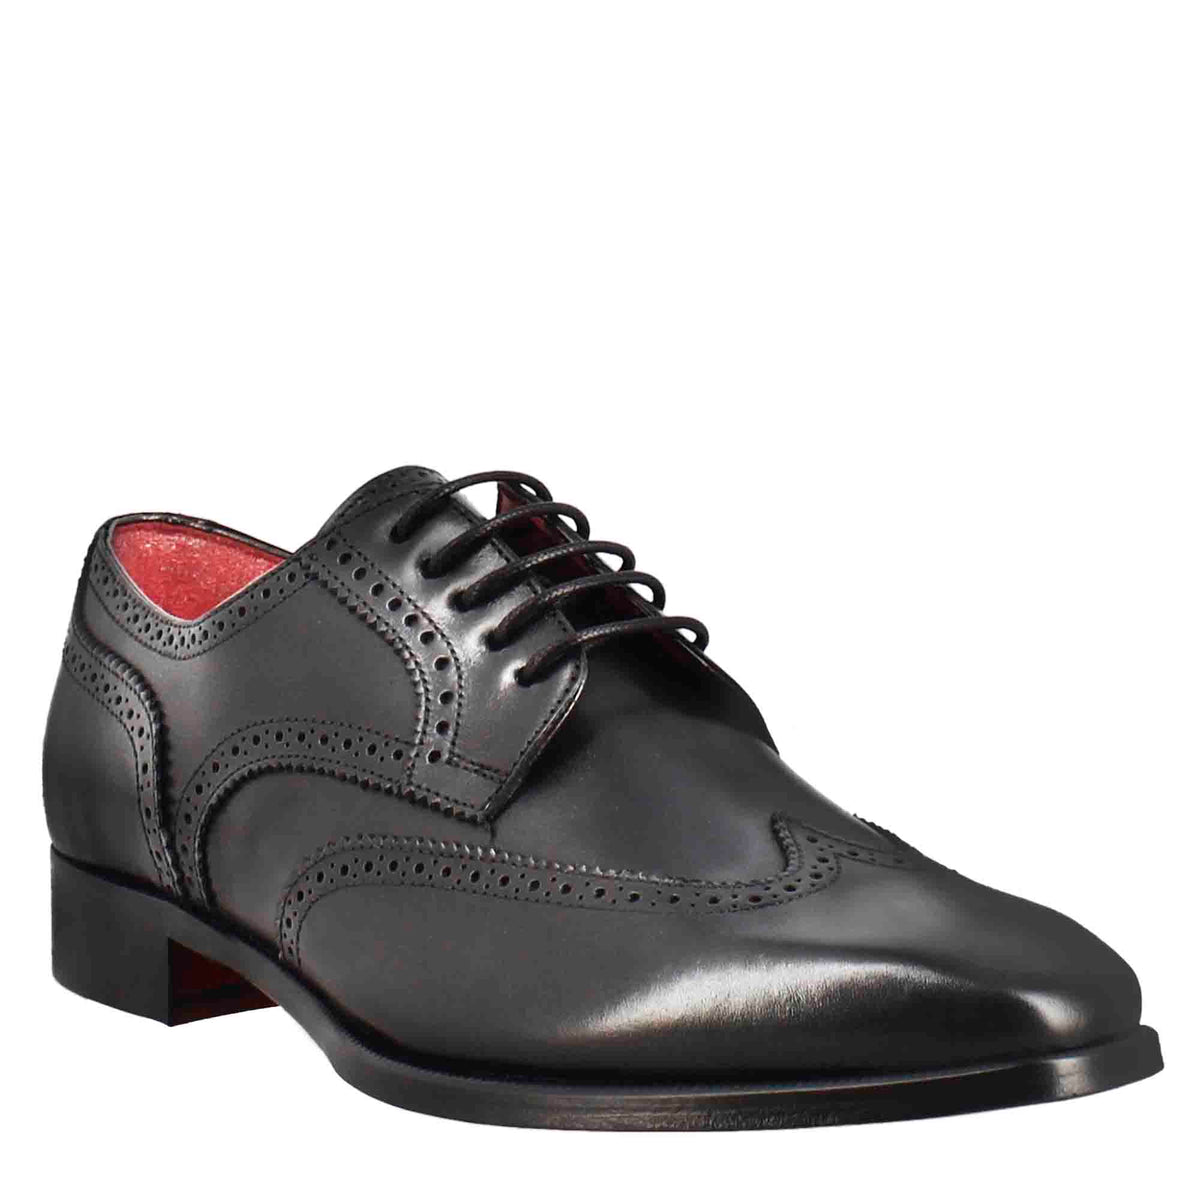 Men's black leather derby with dovetail and square toe